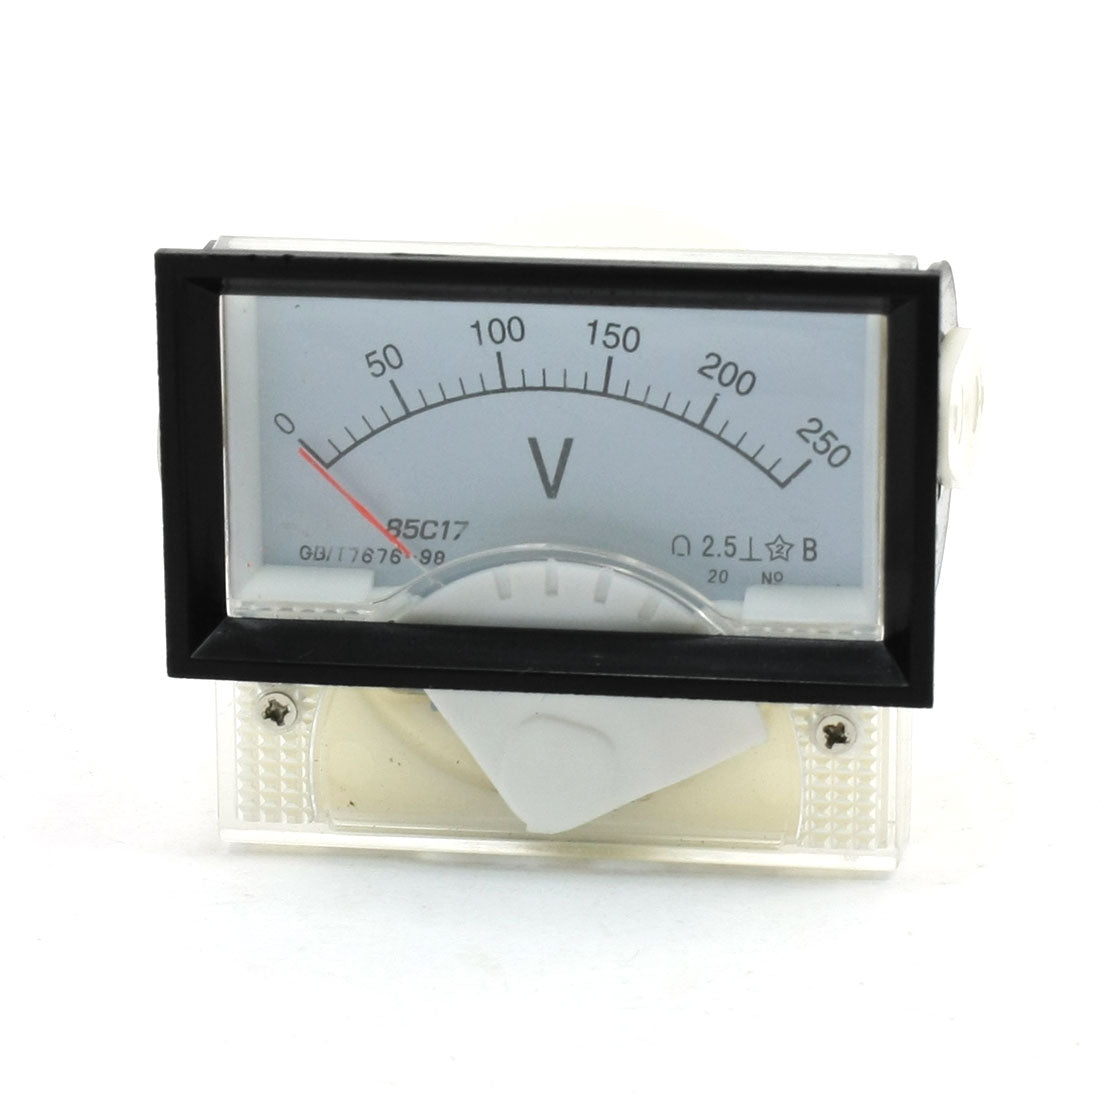 uxcell Uxcell 85C17 DC 0-250V Analogue Pointer Panel Meter Voltmeter